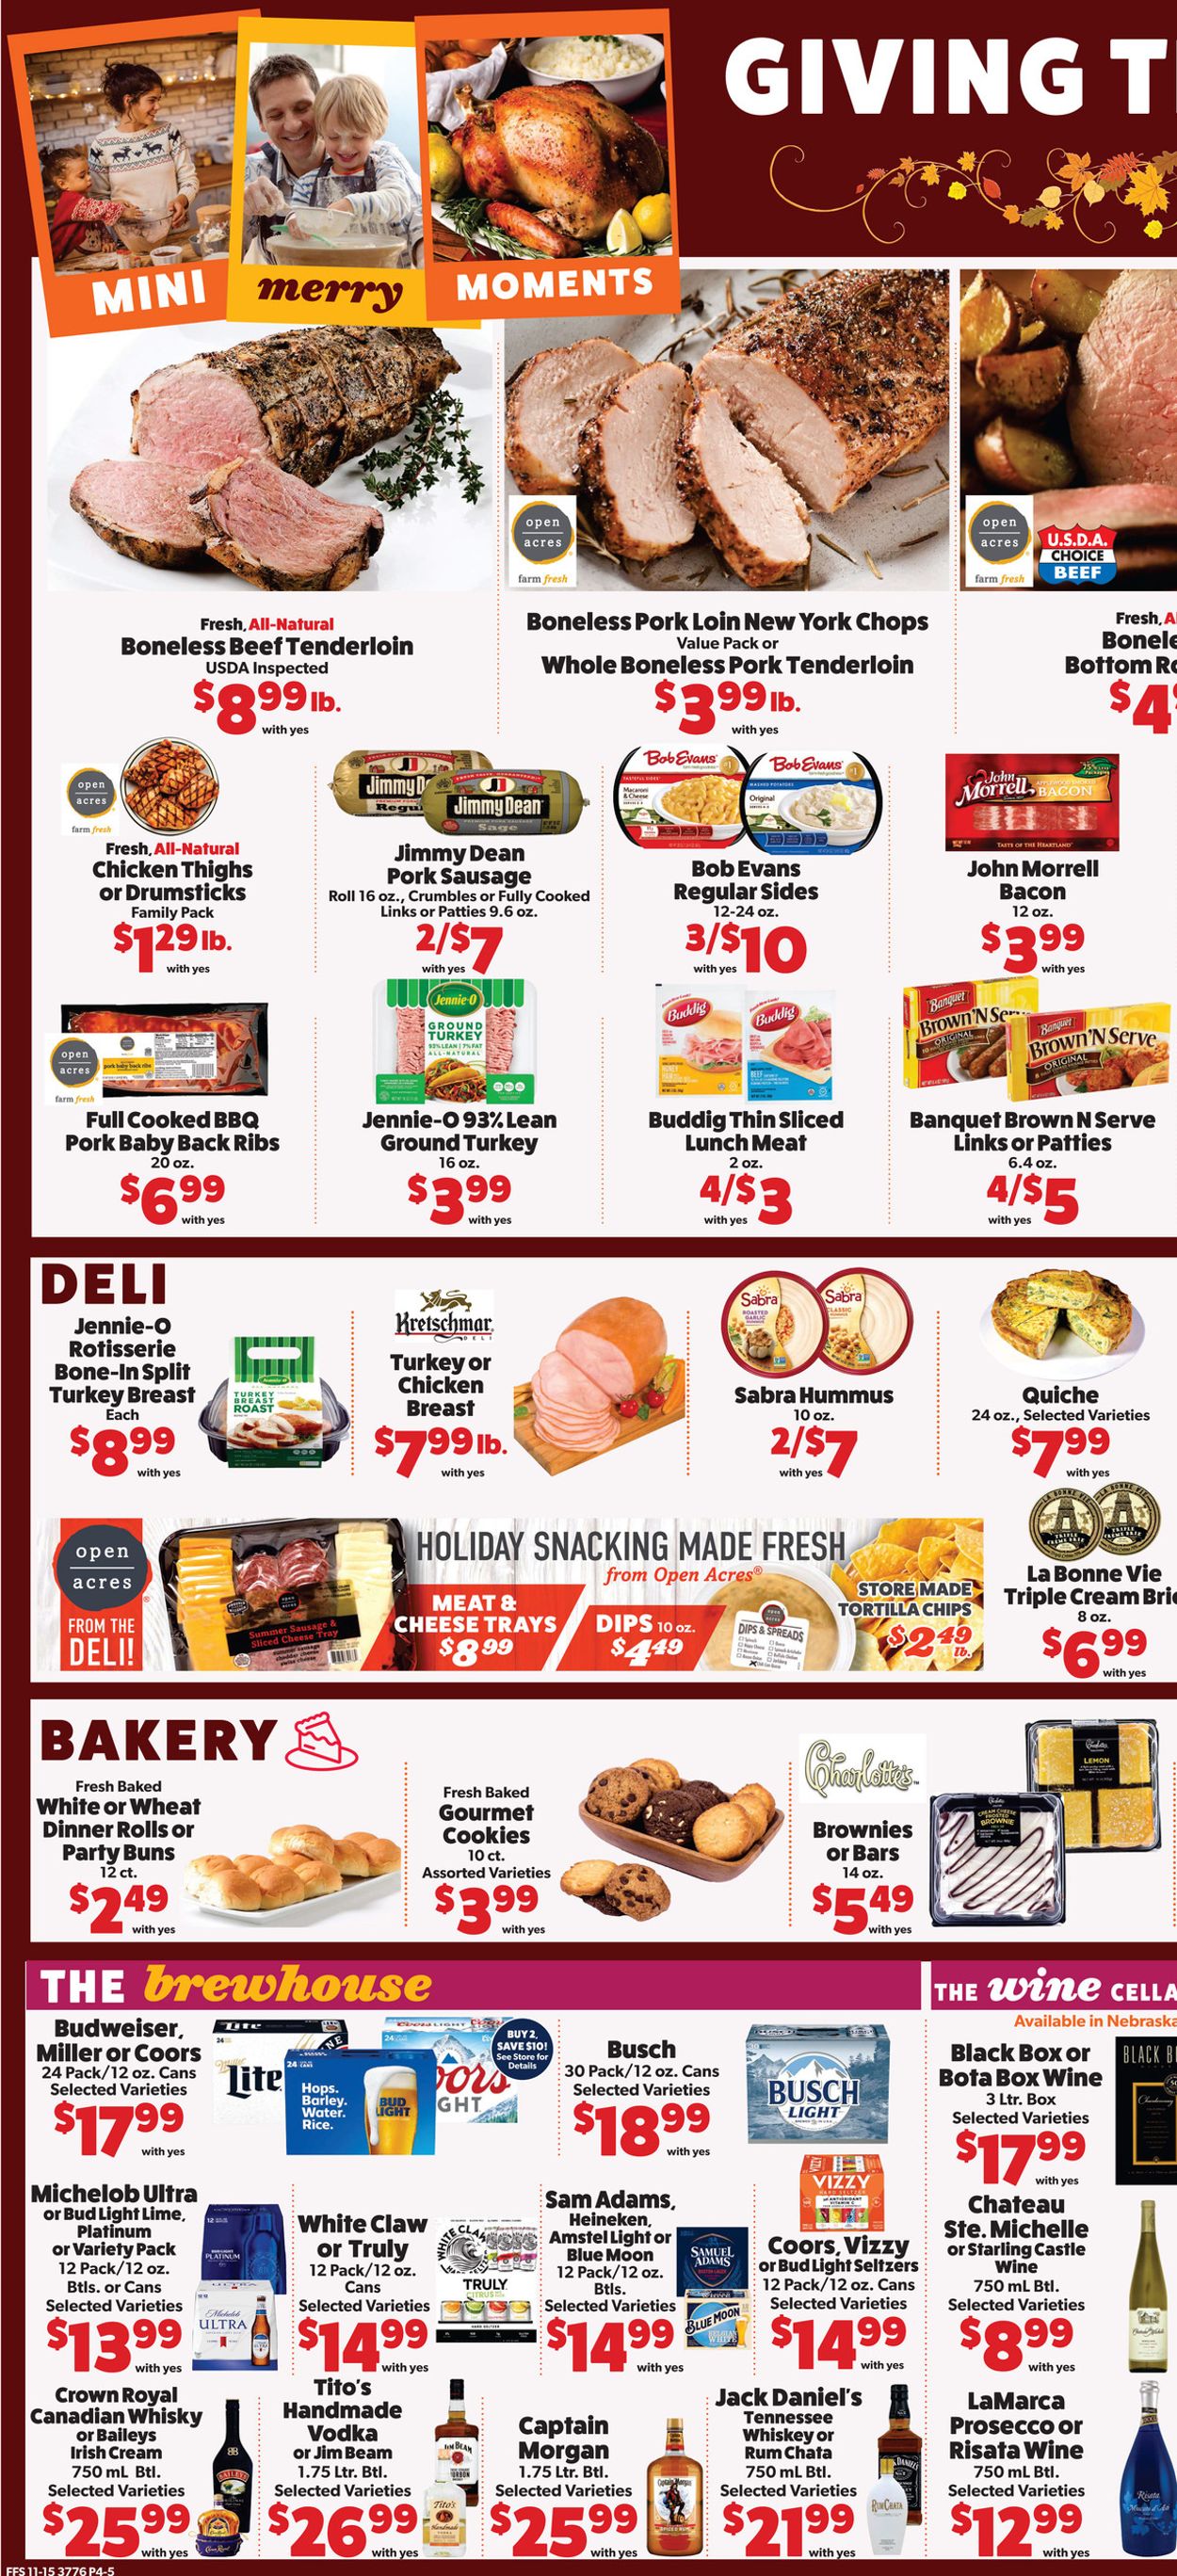 Catalogue Family Fare Thanksgiving ad 2020 from 11/18/2020